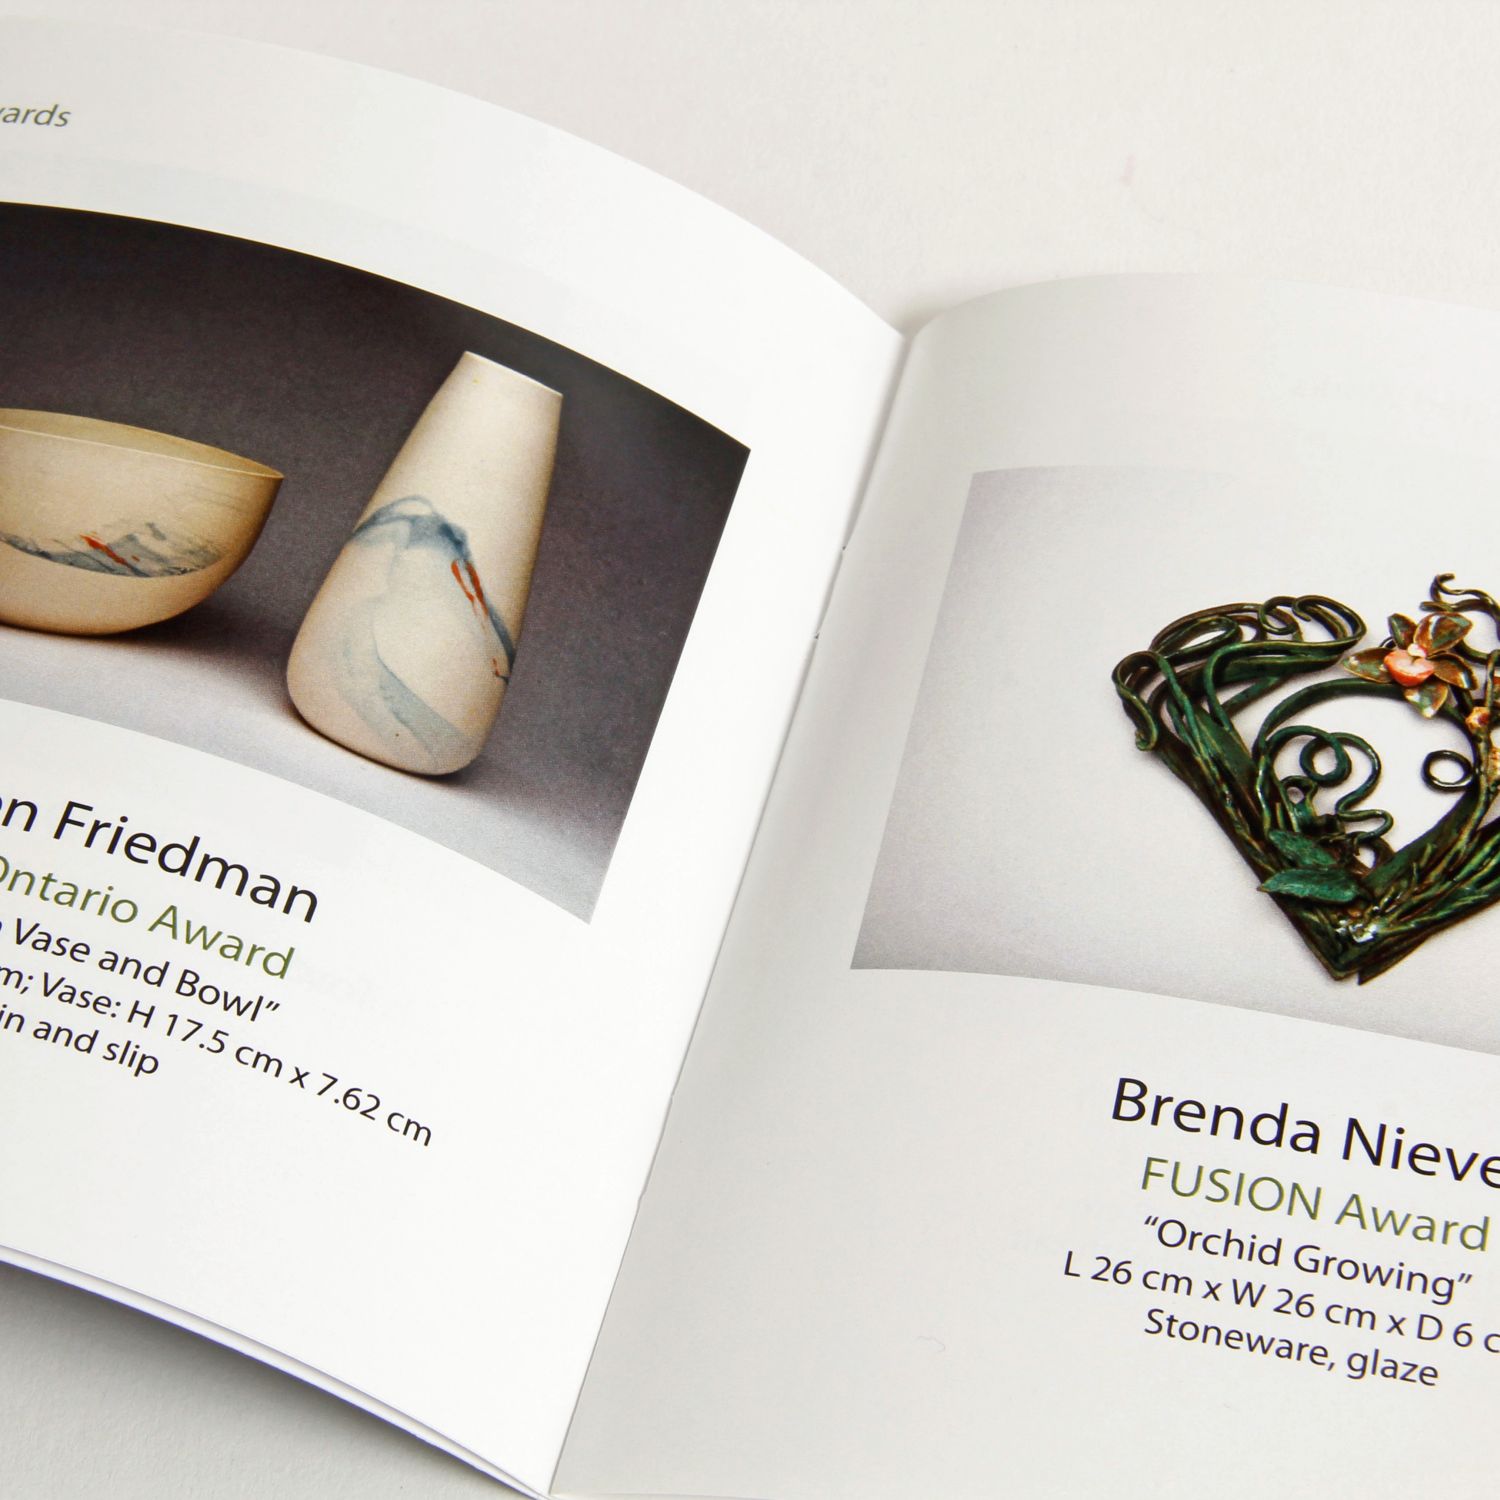 21 st Biennial Exhibition: Toronto Potters Catalogue Product Image 4 of 6